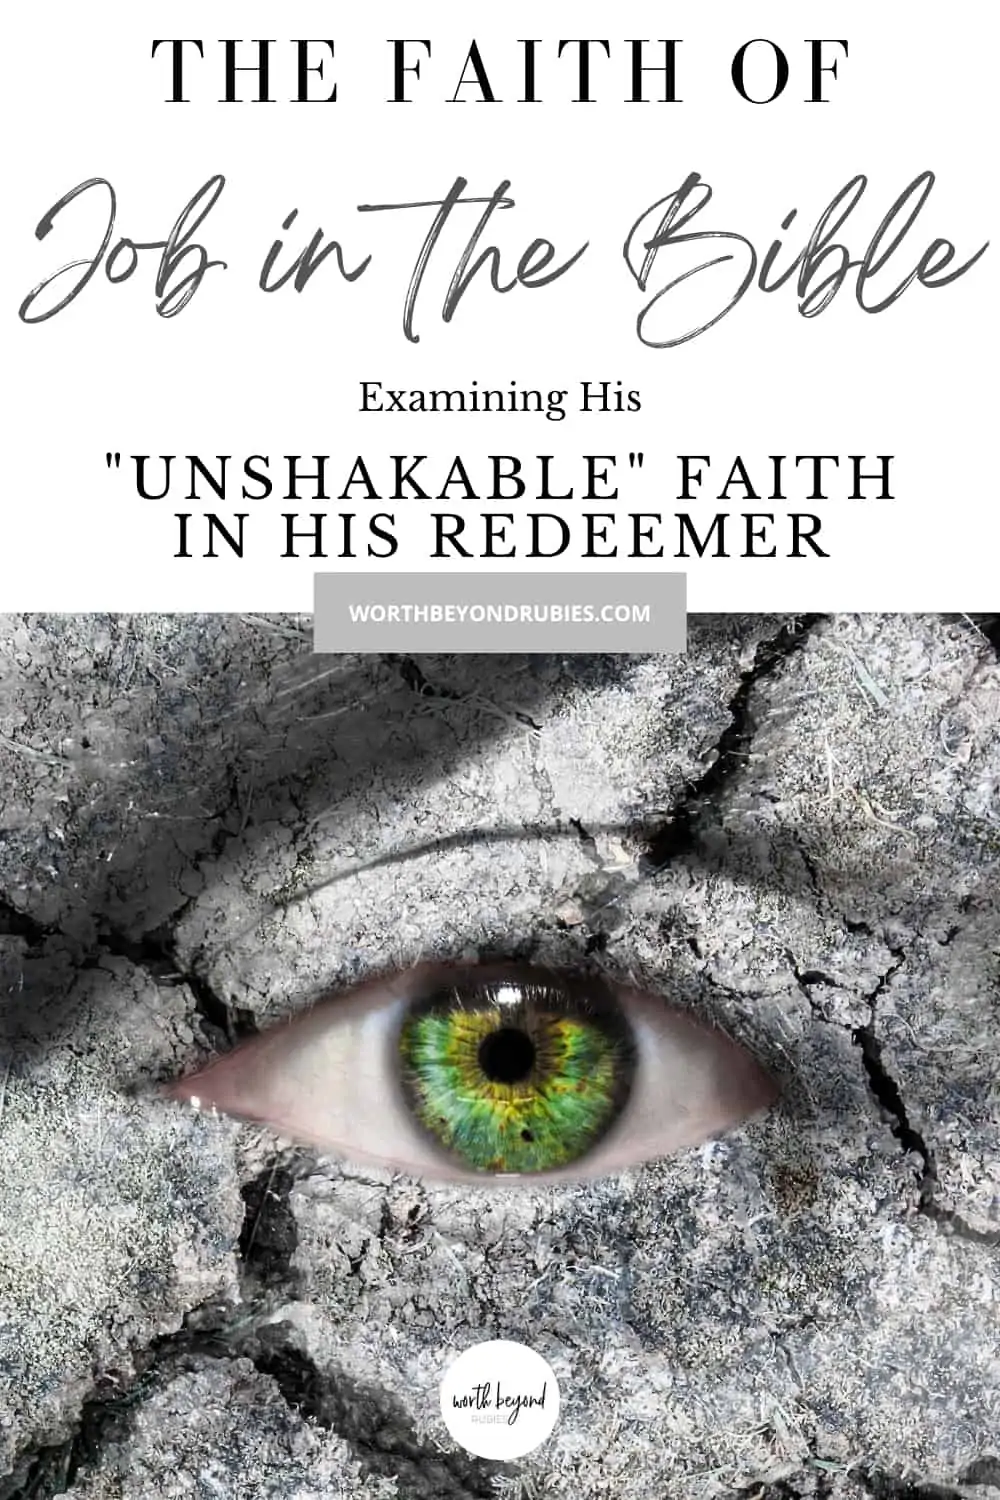 Conceptual image of a man falling apart focused on his green eye - with text that says The Faith of Job in the Bible - Examining His “Unshakable” Faith in His Redeemer